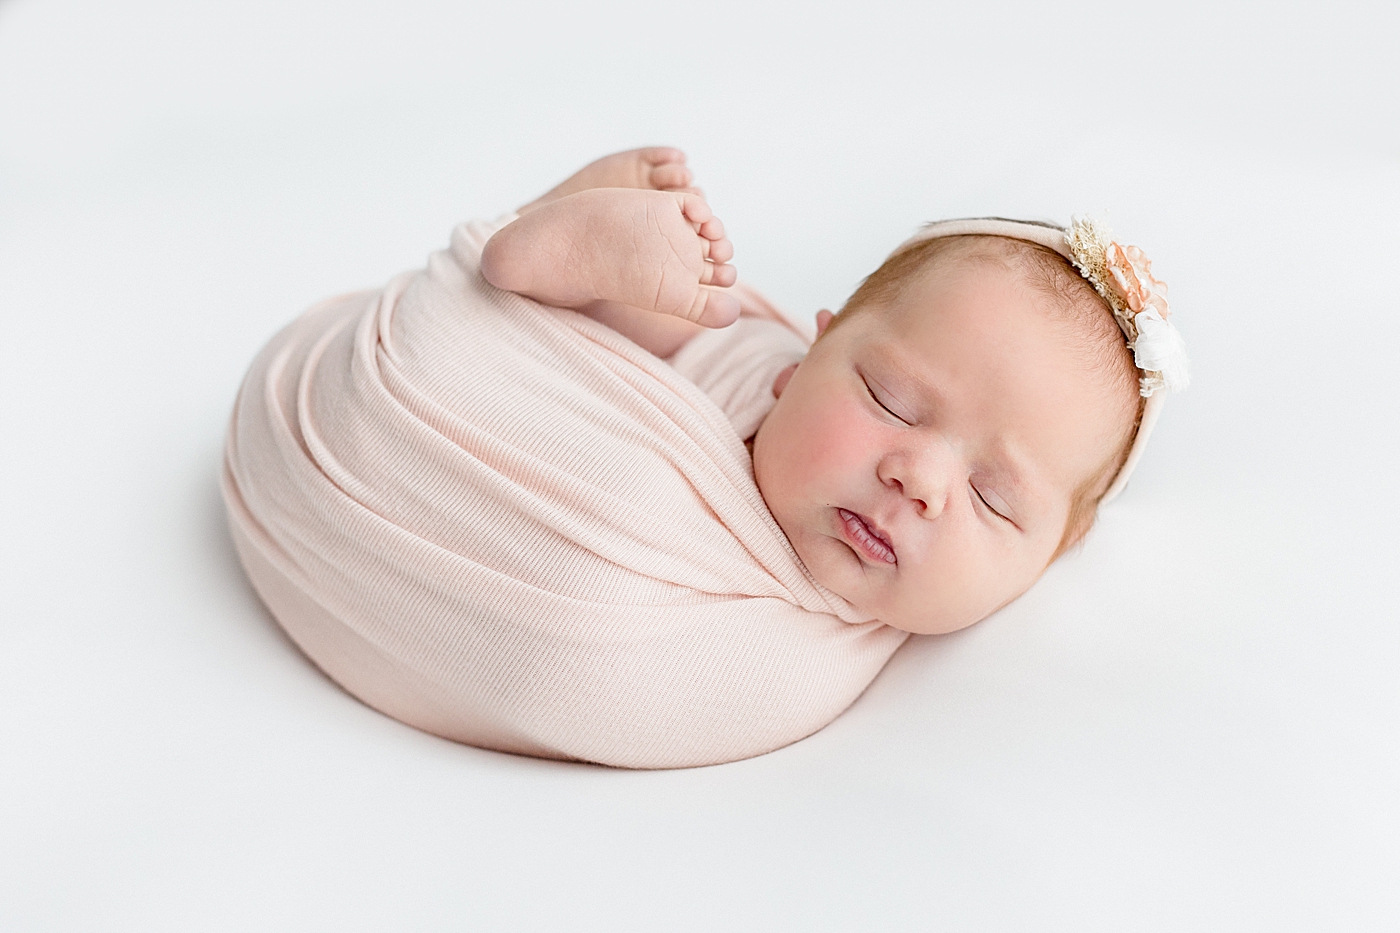 Newborn baby girl in a pink swaddle wearing a headband | Image by Sana Ahmed Photography